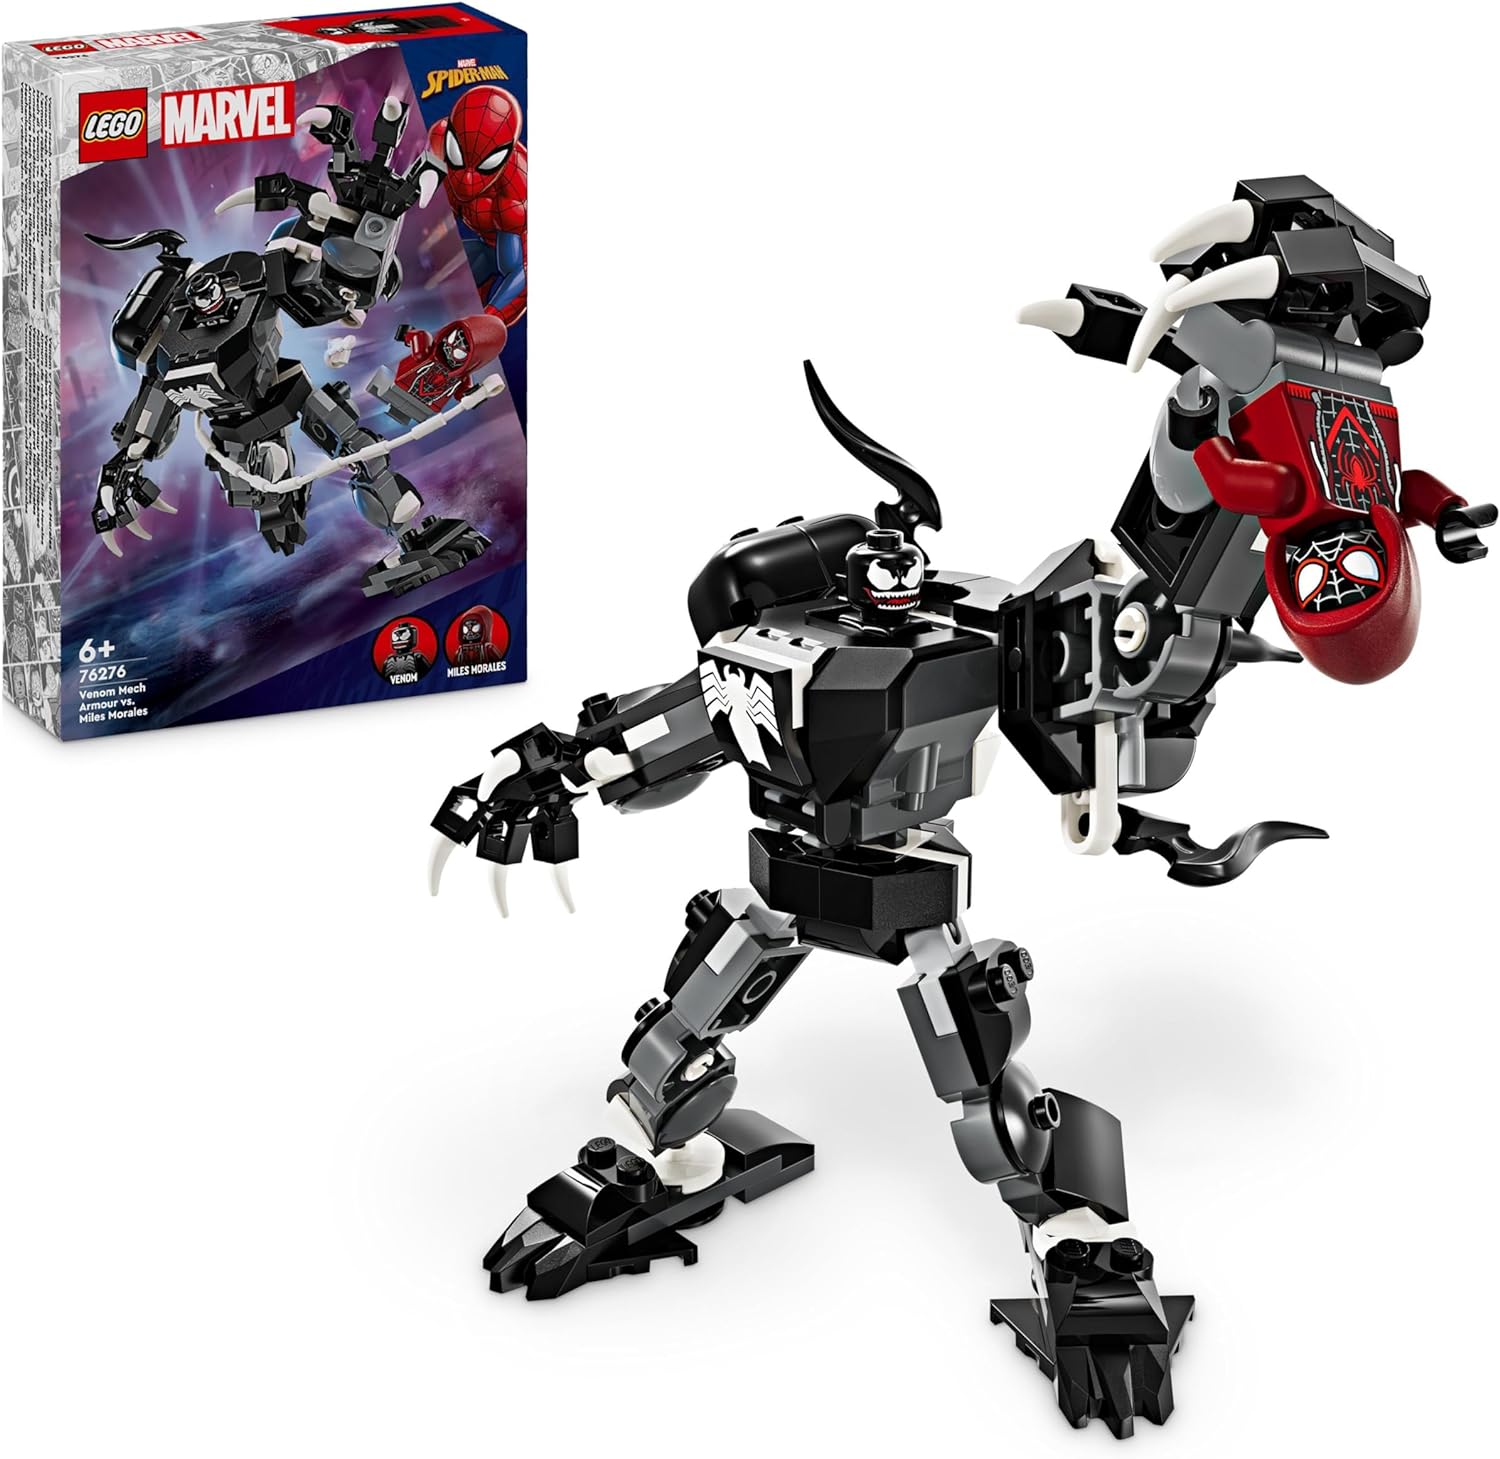 LEGO Marvel Venom Mech vs. Miles Morales, Movable Action Figures for Children, Spider-Man Set with Mini Figures for Superhero Duels, Toy Gift for Boys and Girls from 6 Years 76276